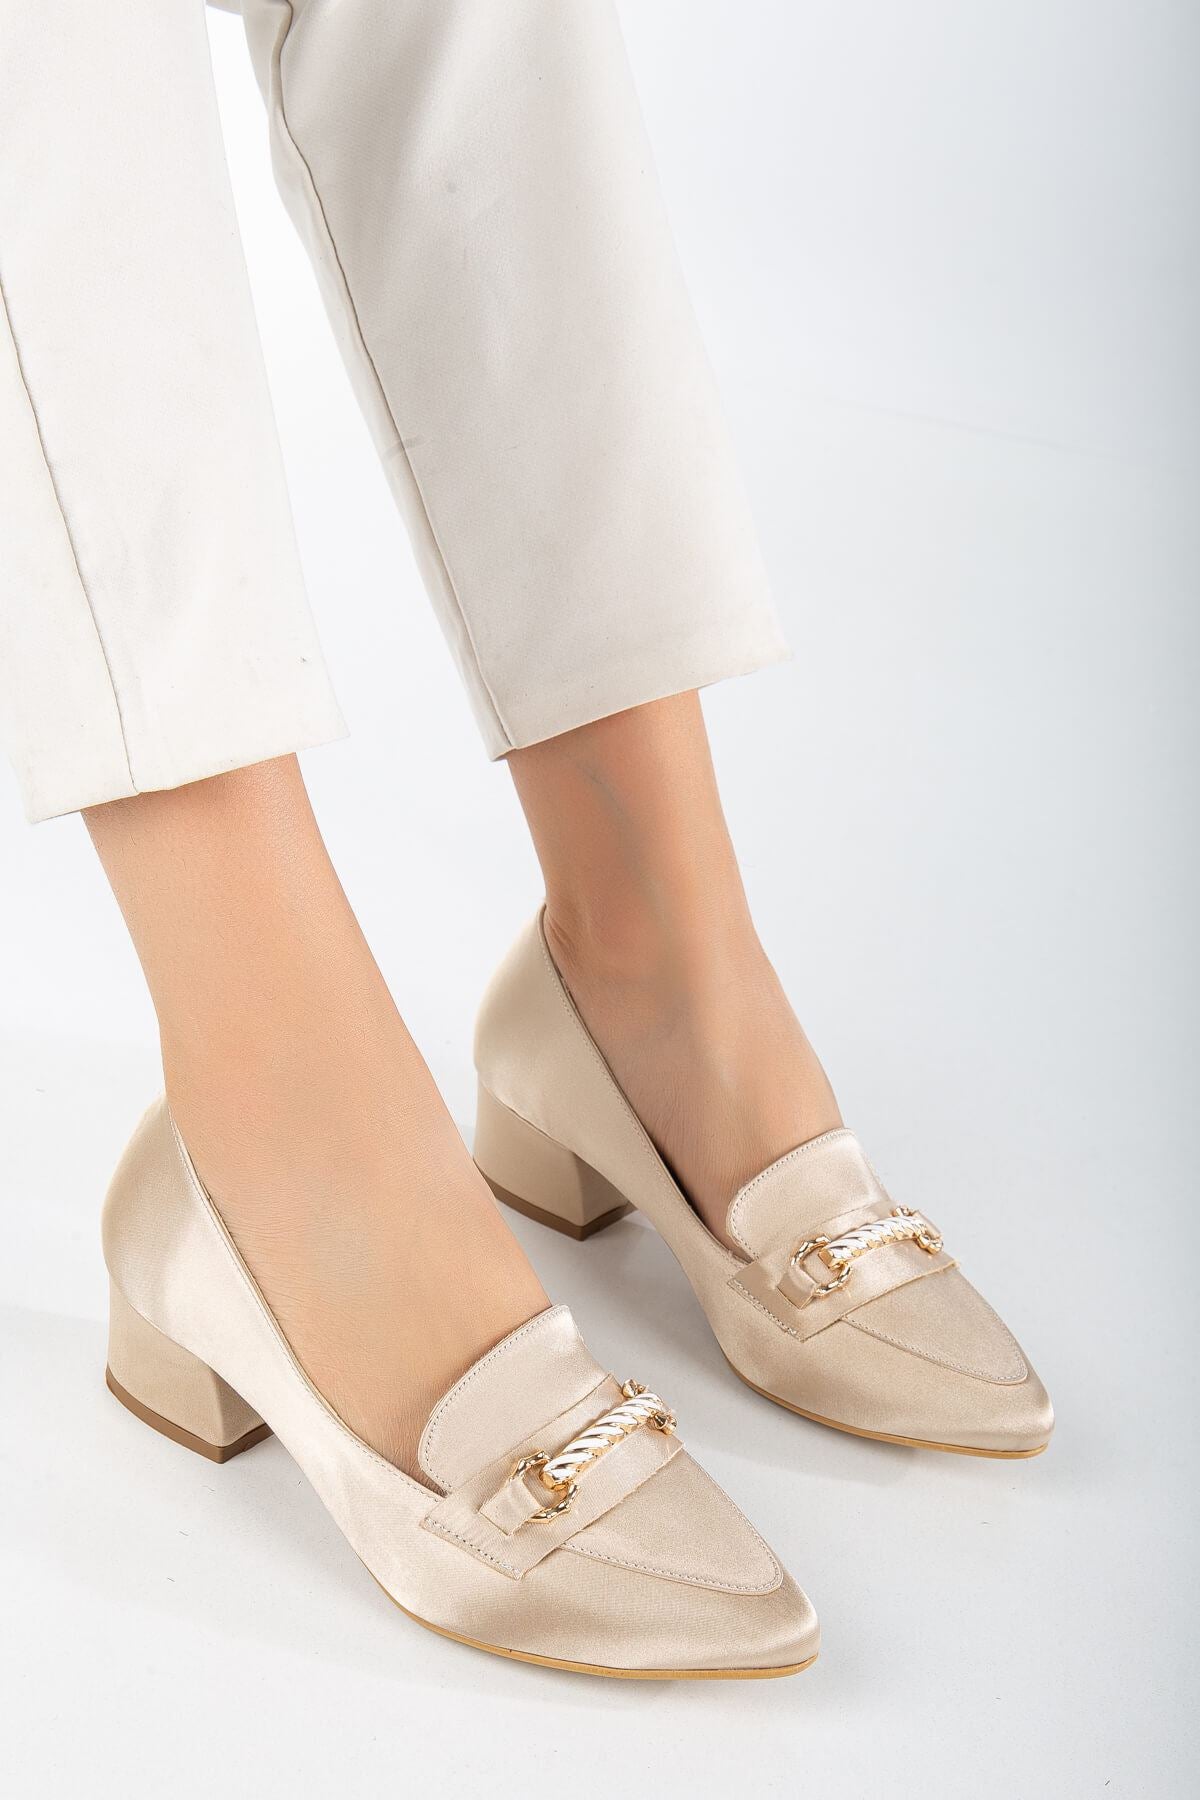 Cream Satin Buckle Detailed Women's Low Heeled Shoes - STREETMODE™